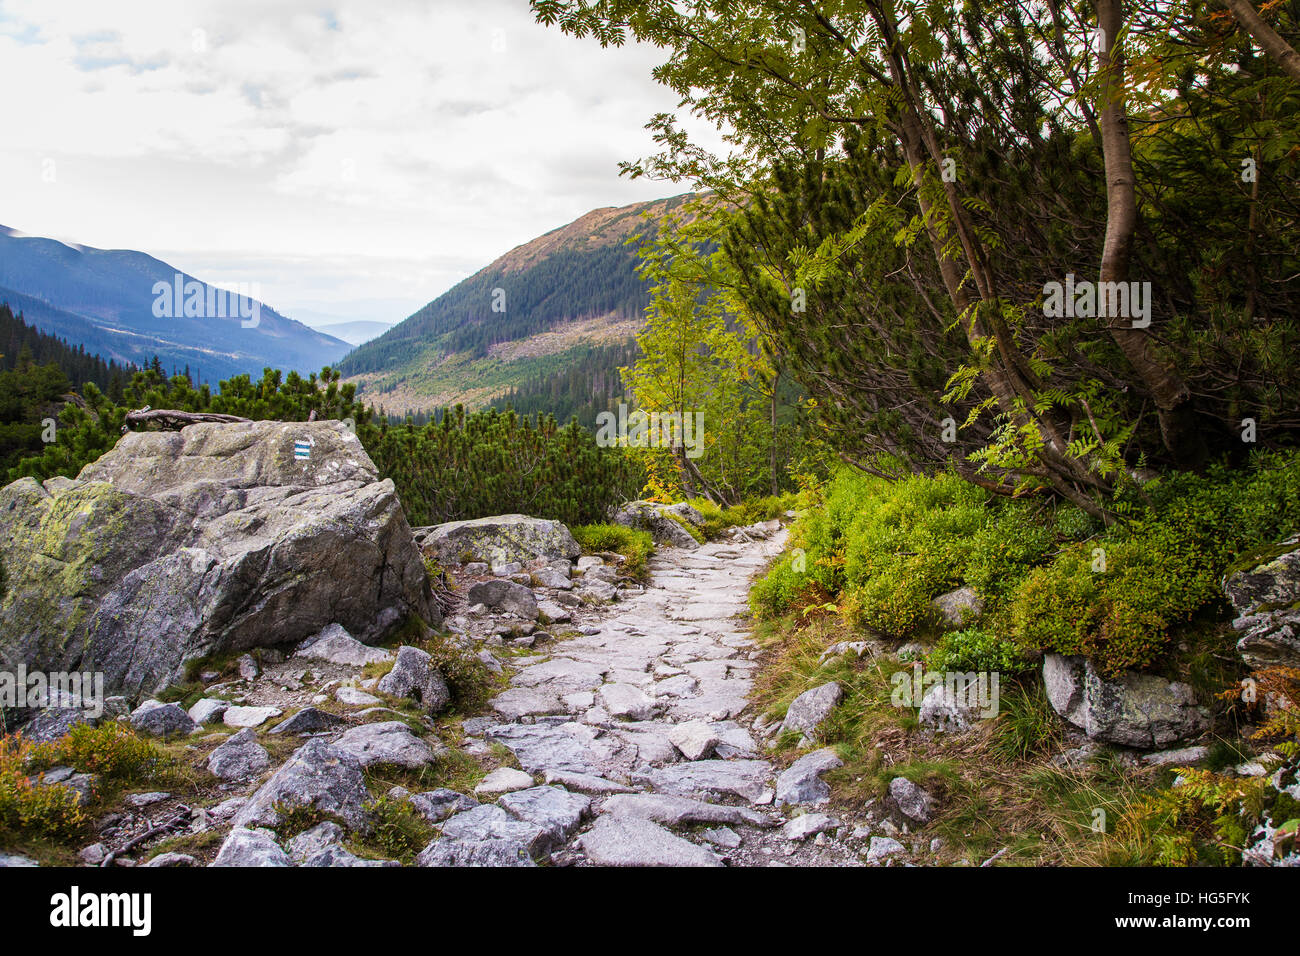 A beautiful mountain landscape with trees Stock Photo